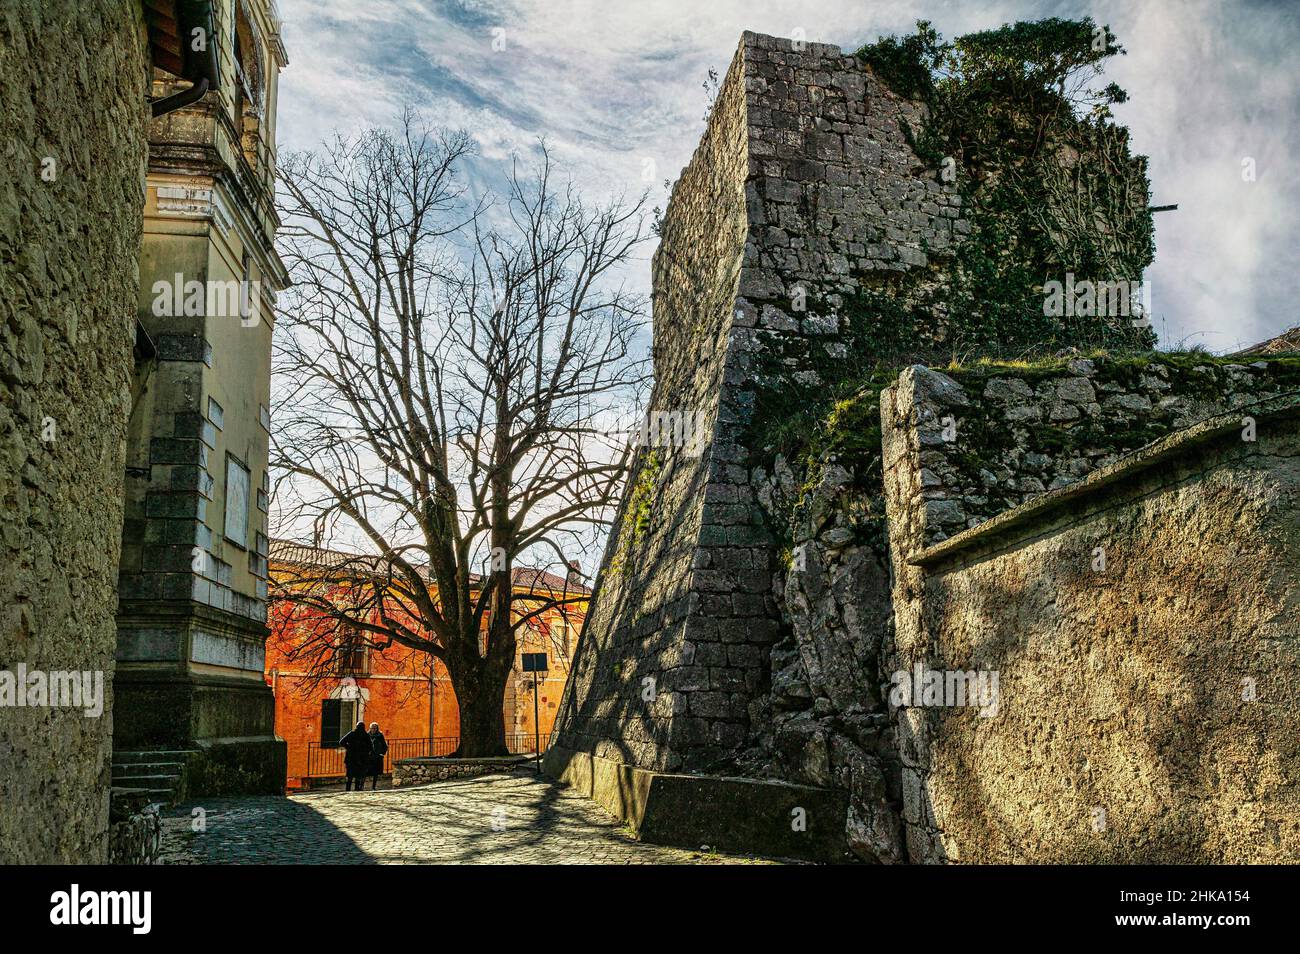 The castle of Settefrati, of which remains of the tower and sporadic remains of walls remain. Settefrati, province of Frosinone, Lazio, Italy, Europe Stock Photo